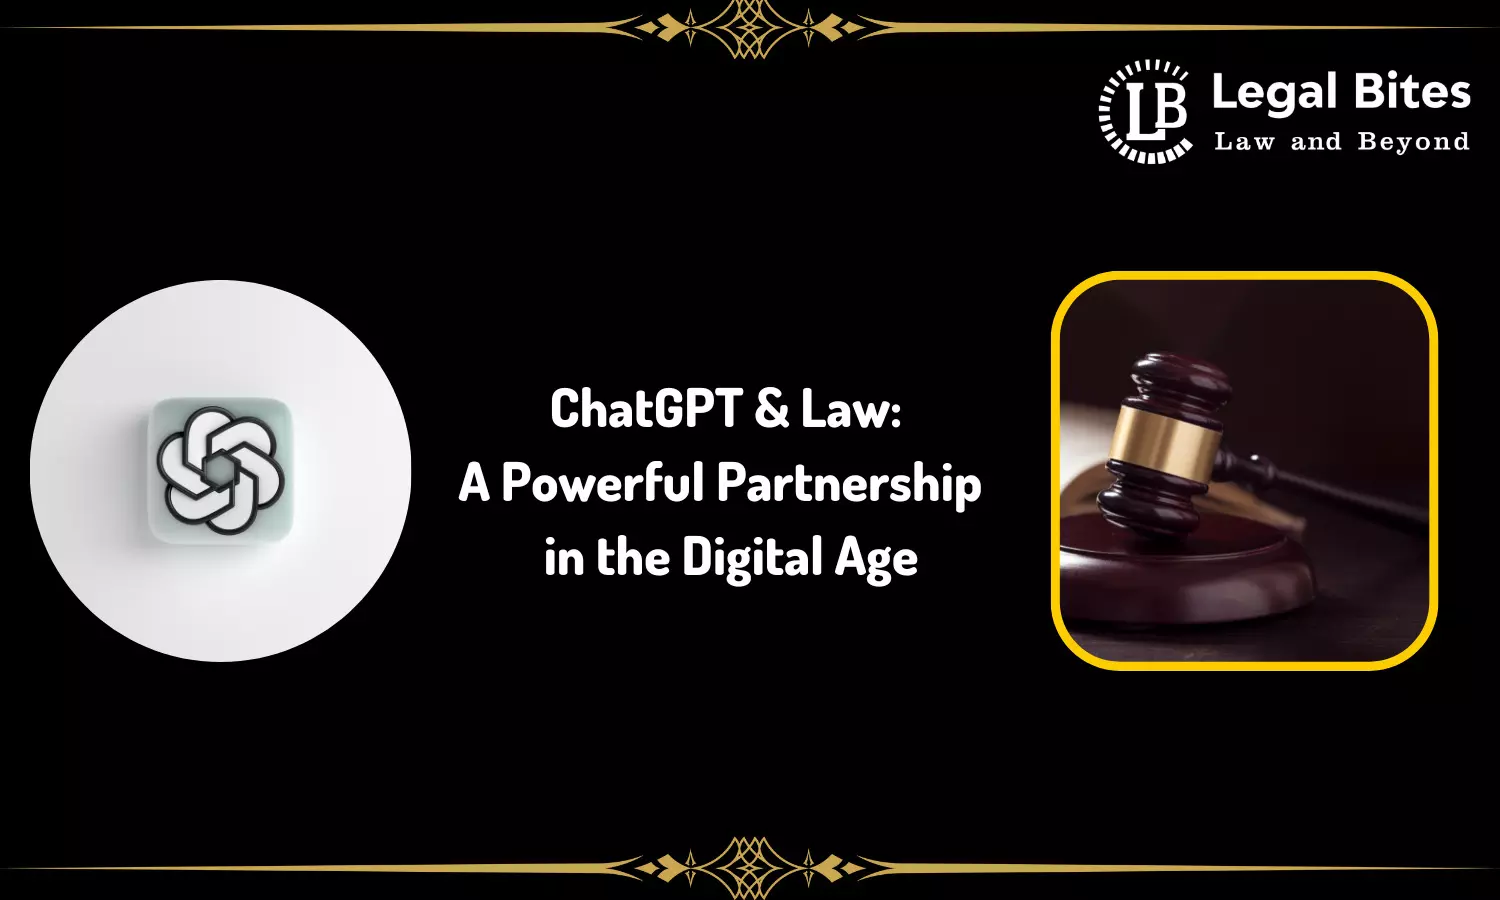 ChatGPT & Law: A Powerful Partnership in the Digital Age